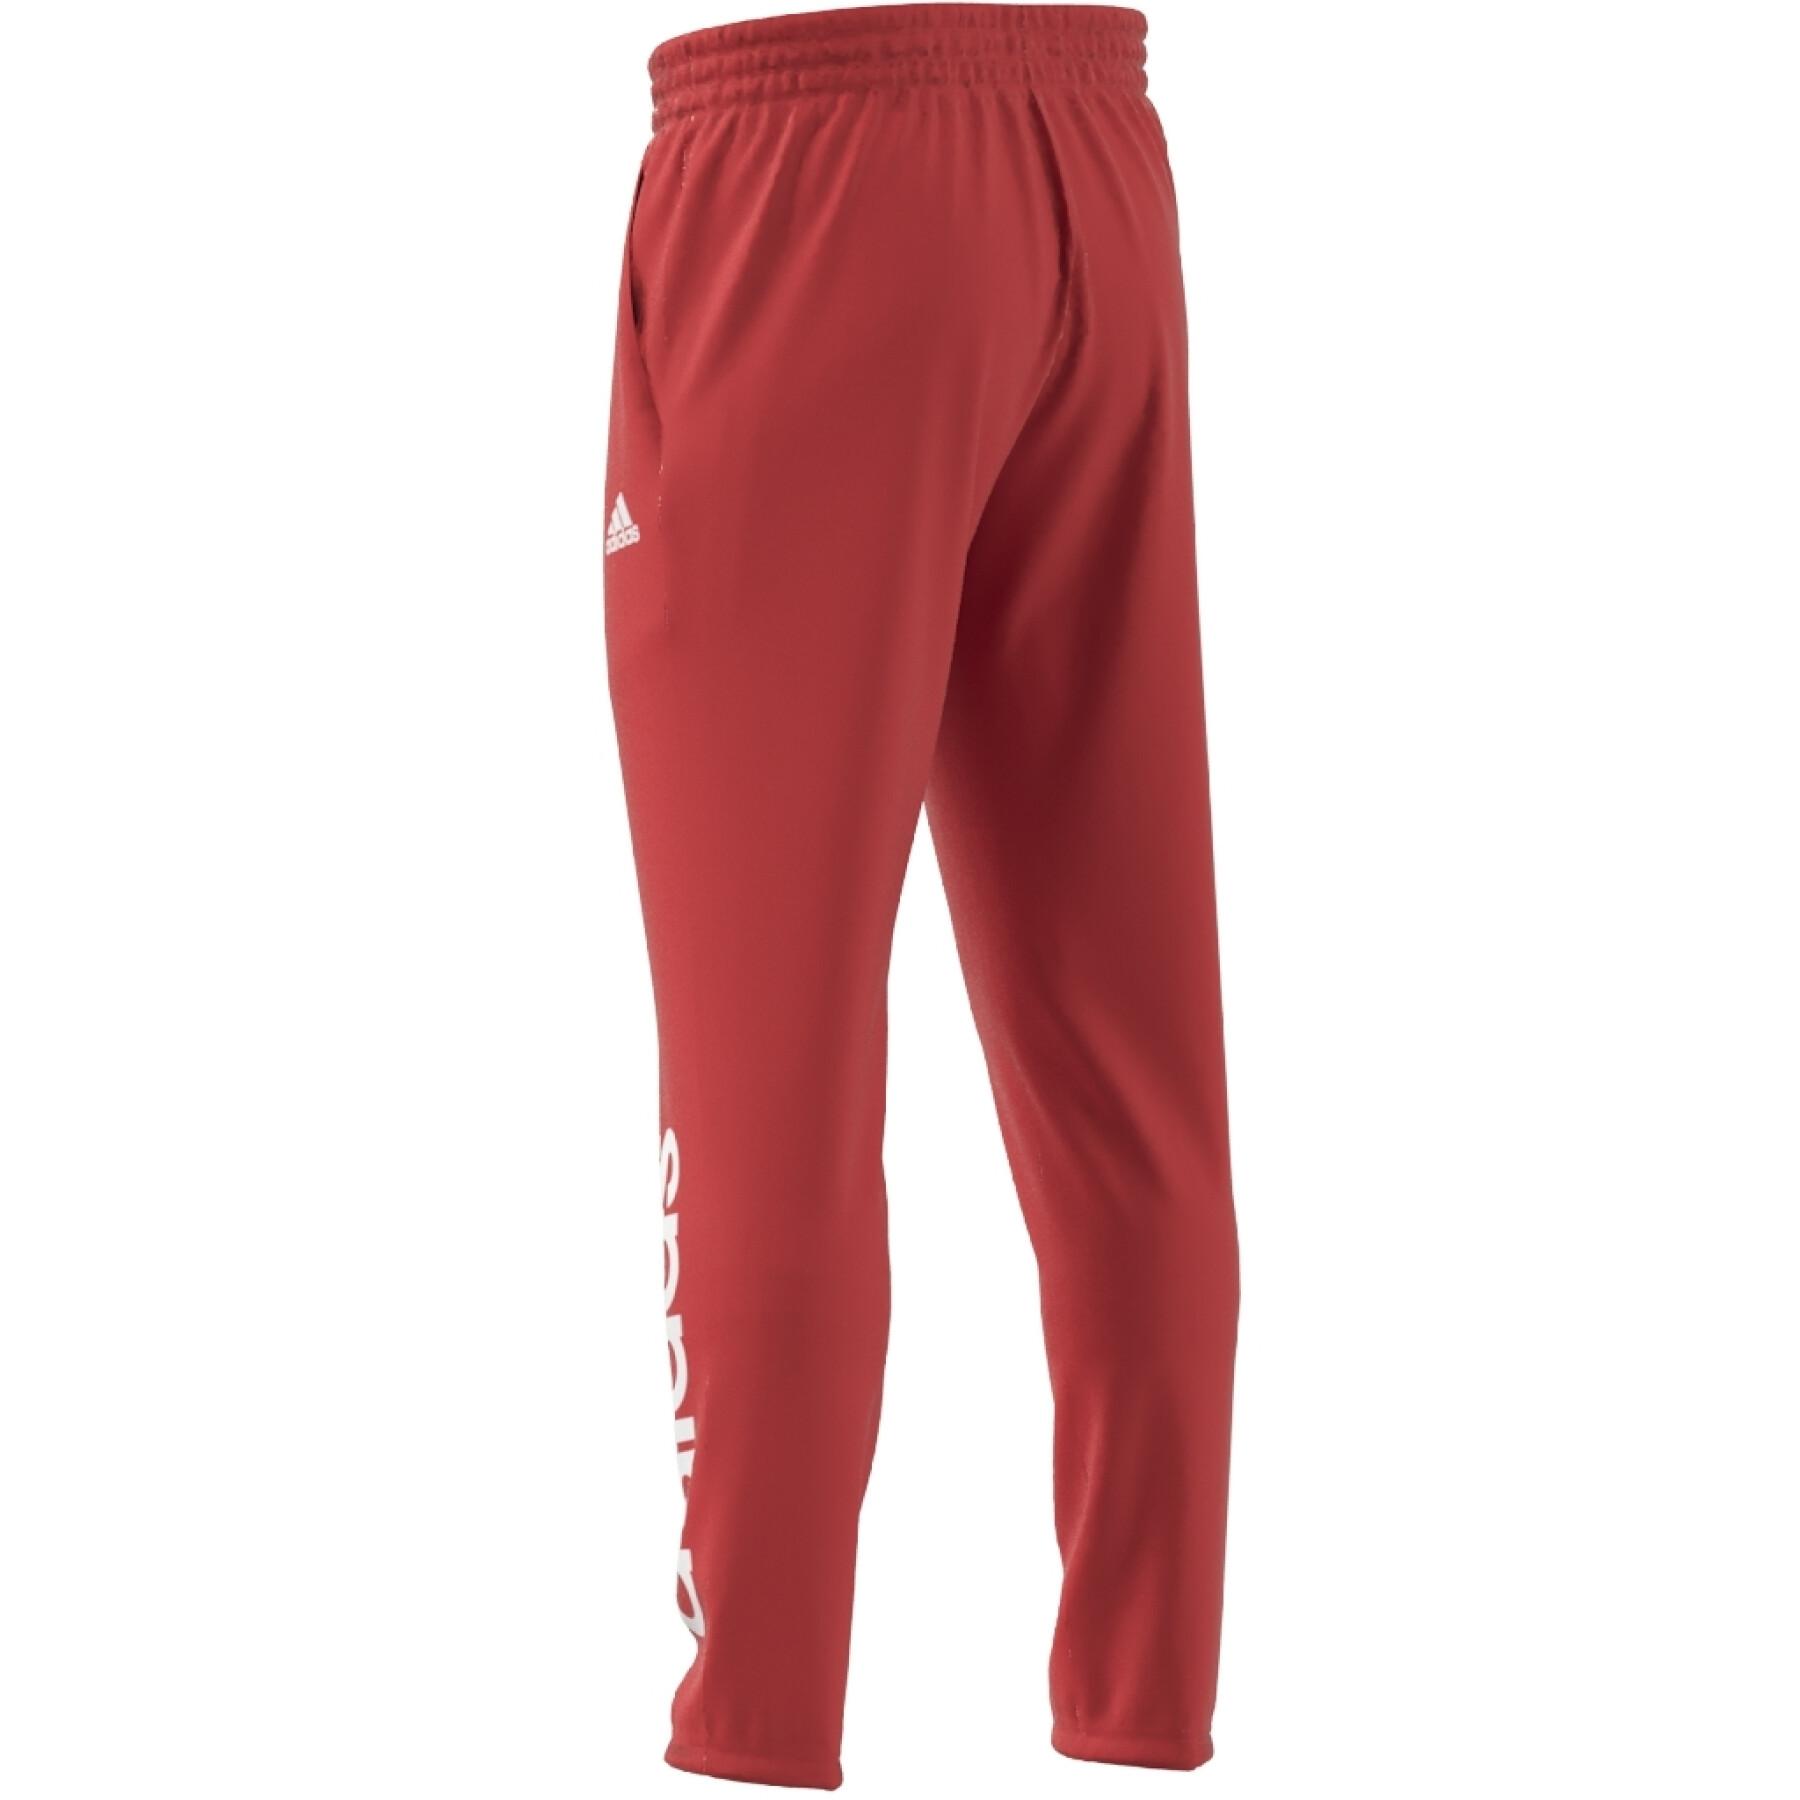 Jogging tapered with logo on elasticated cuffs adidas Essentials